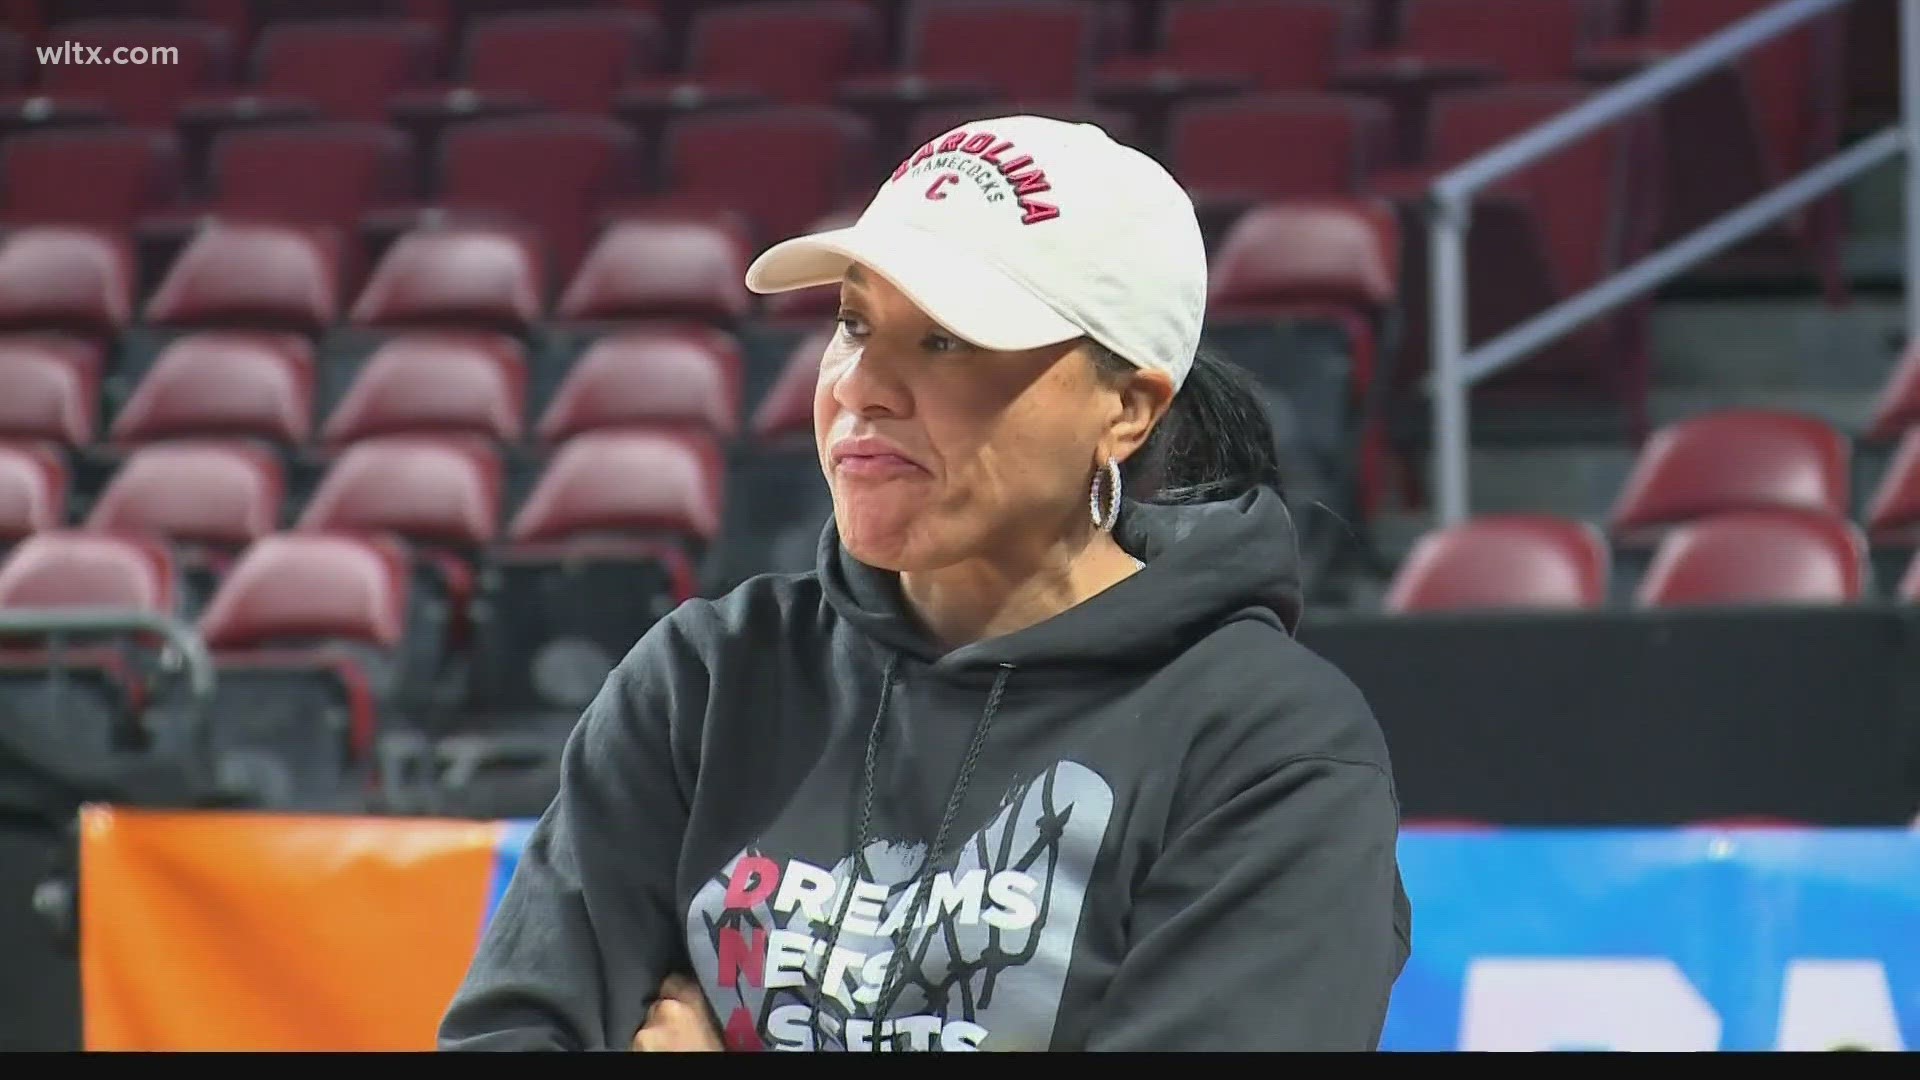 South Carolina women's basketball coach Dawn Staley has been named the U.S. Basketball Writers Association Coach of the Year.